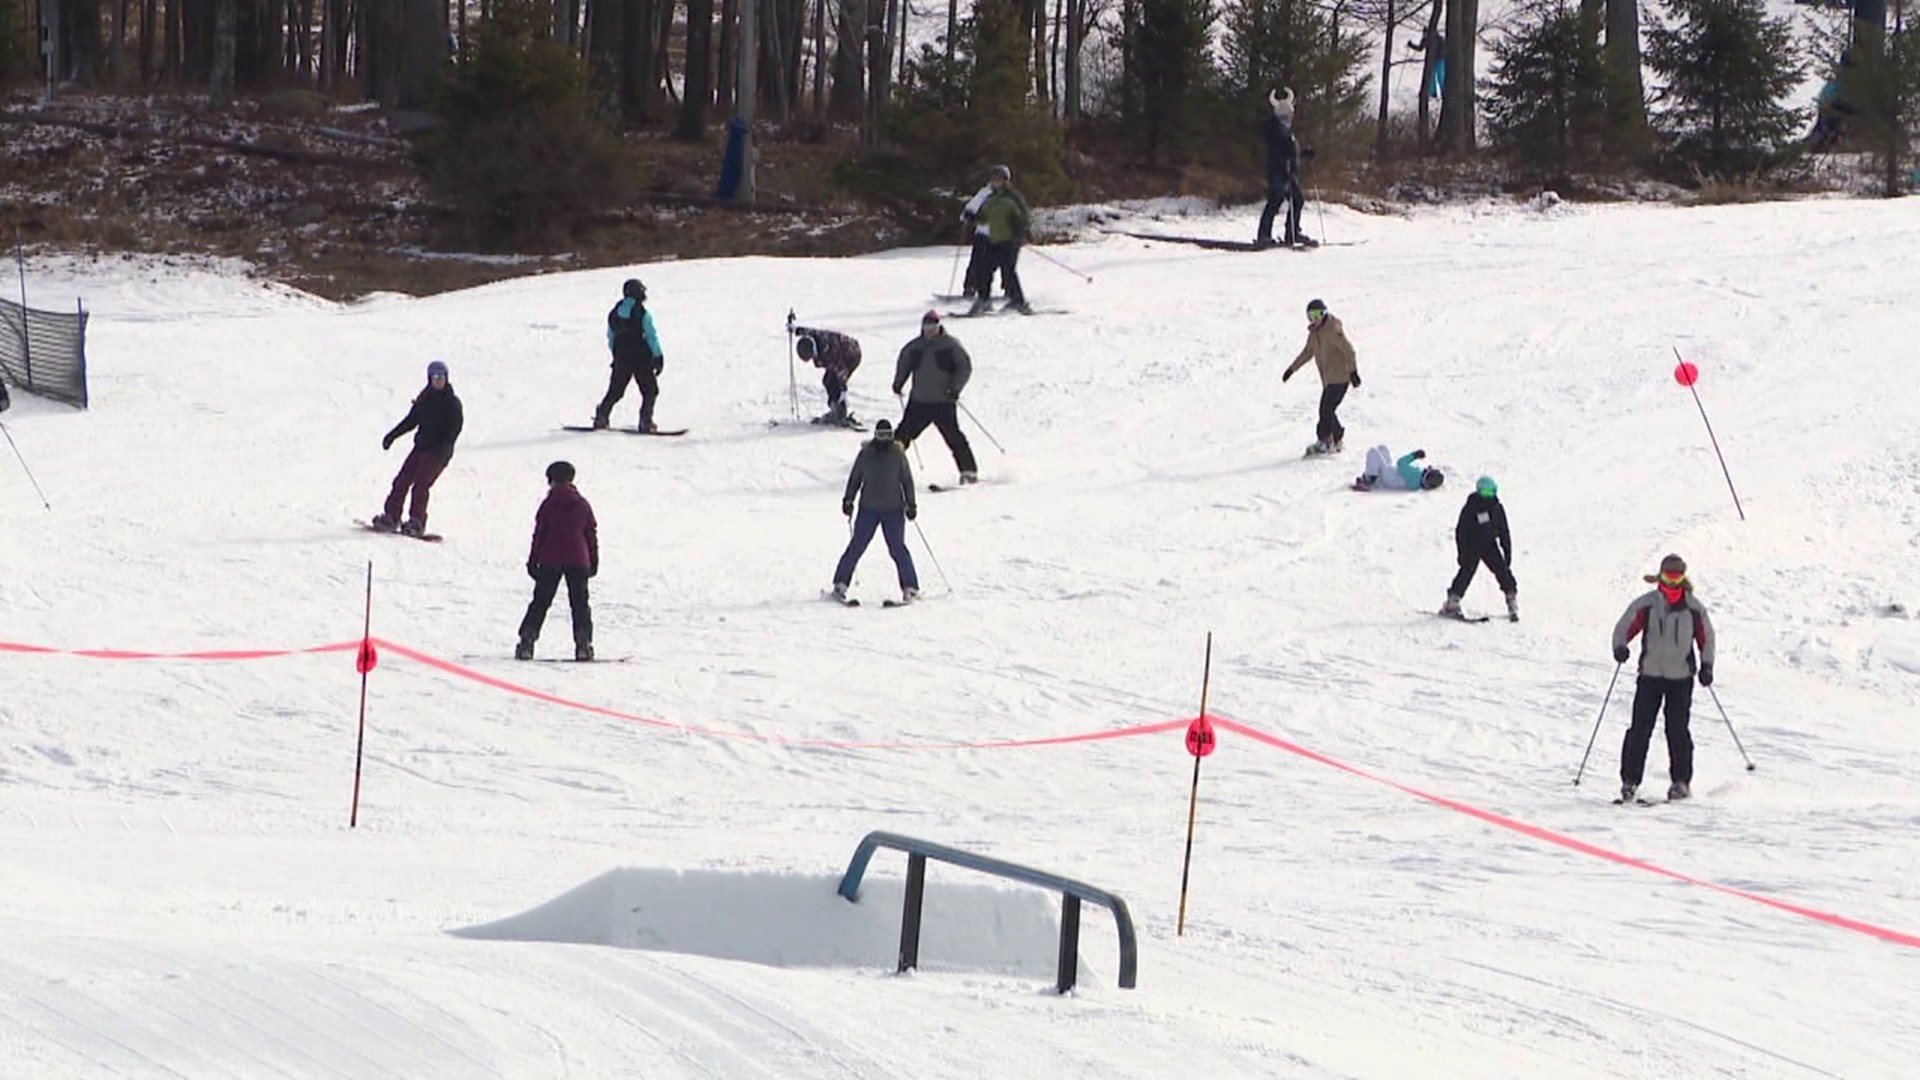 It was a fun day on the slopes while honoring the legacy of a Luzerne County man's battle with cancer.